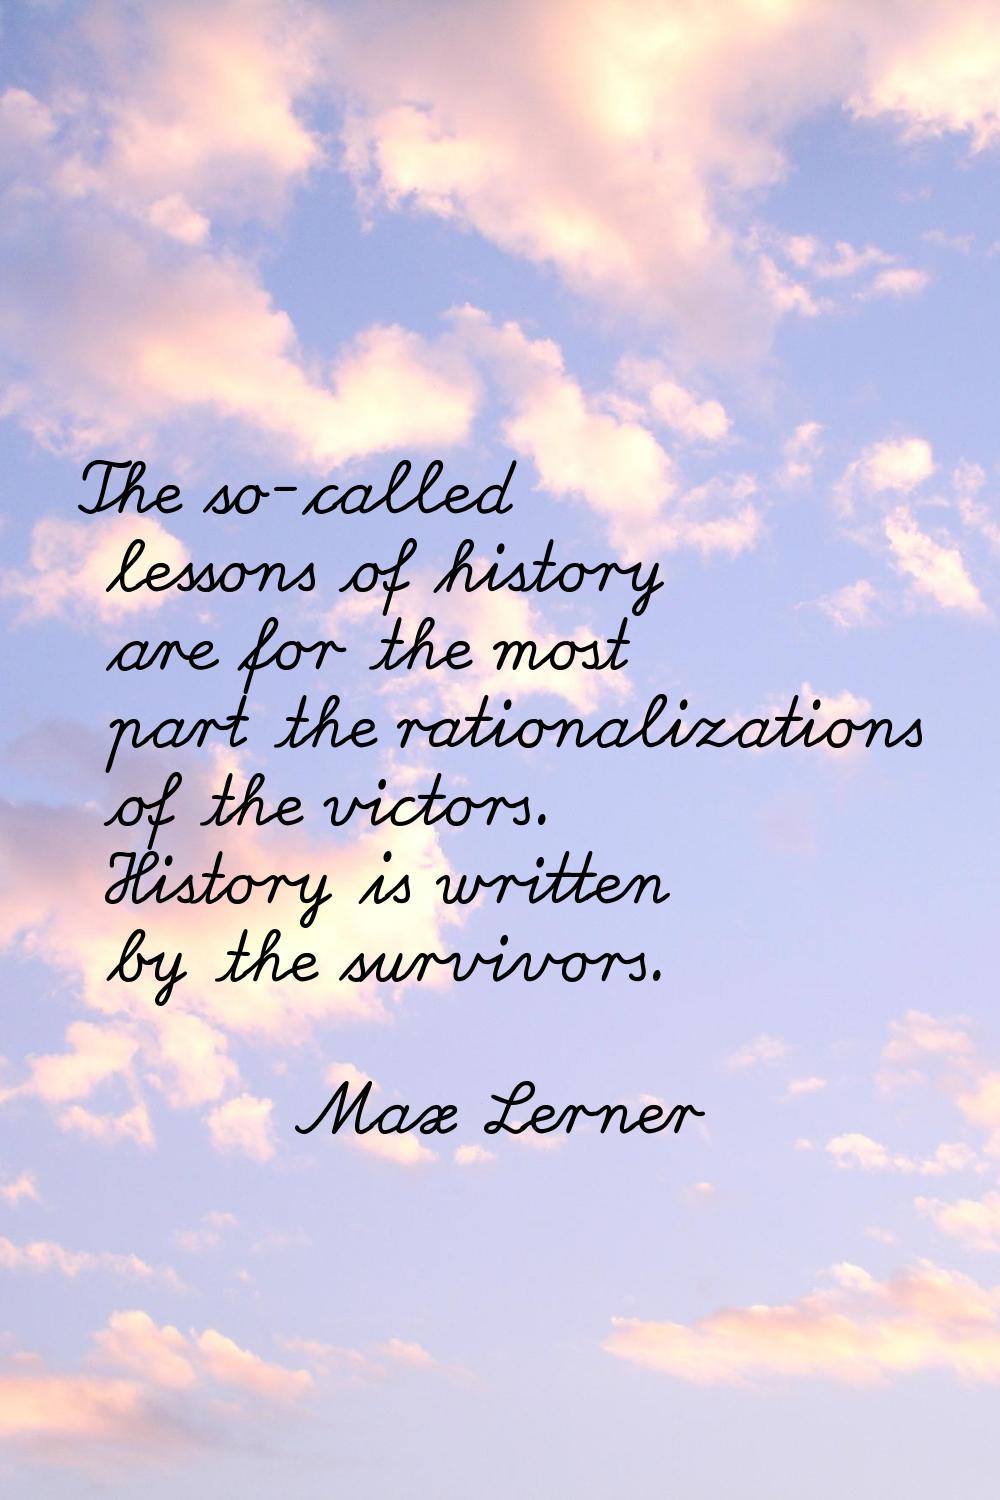 The so-called lessons of history are for the most part the rationalizations of the victors. History